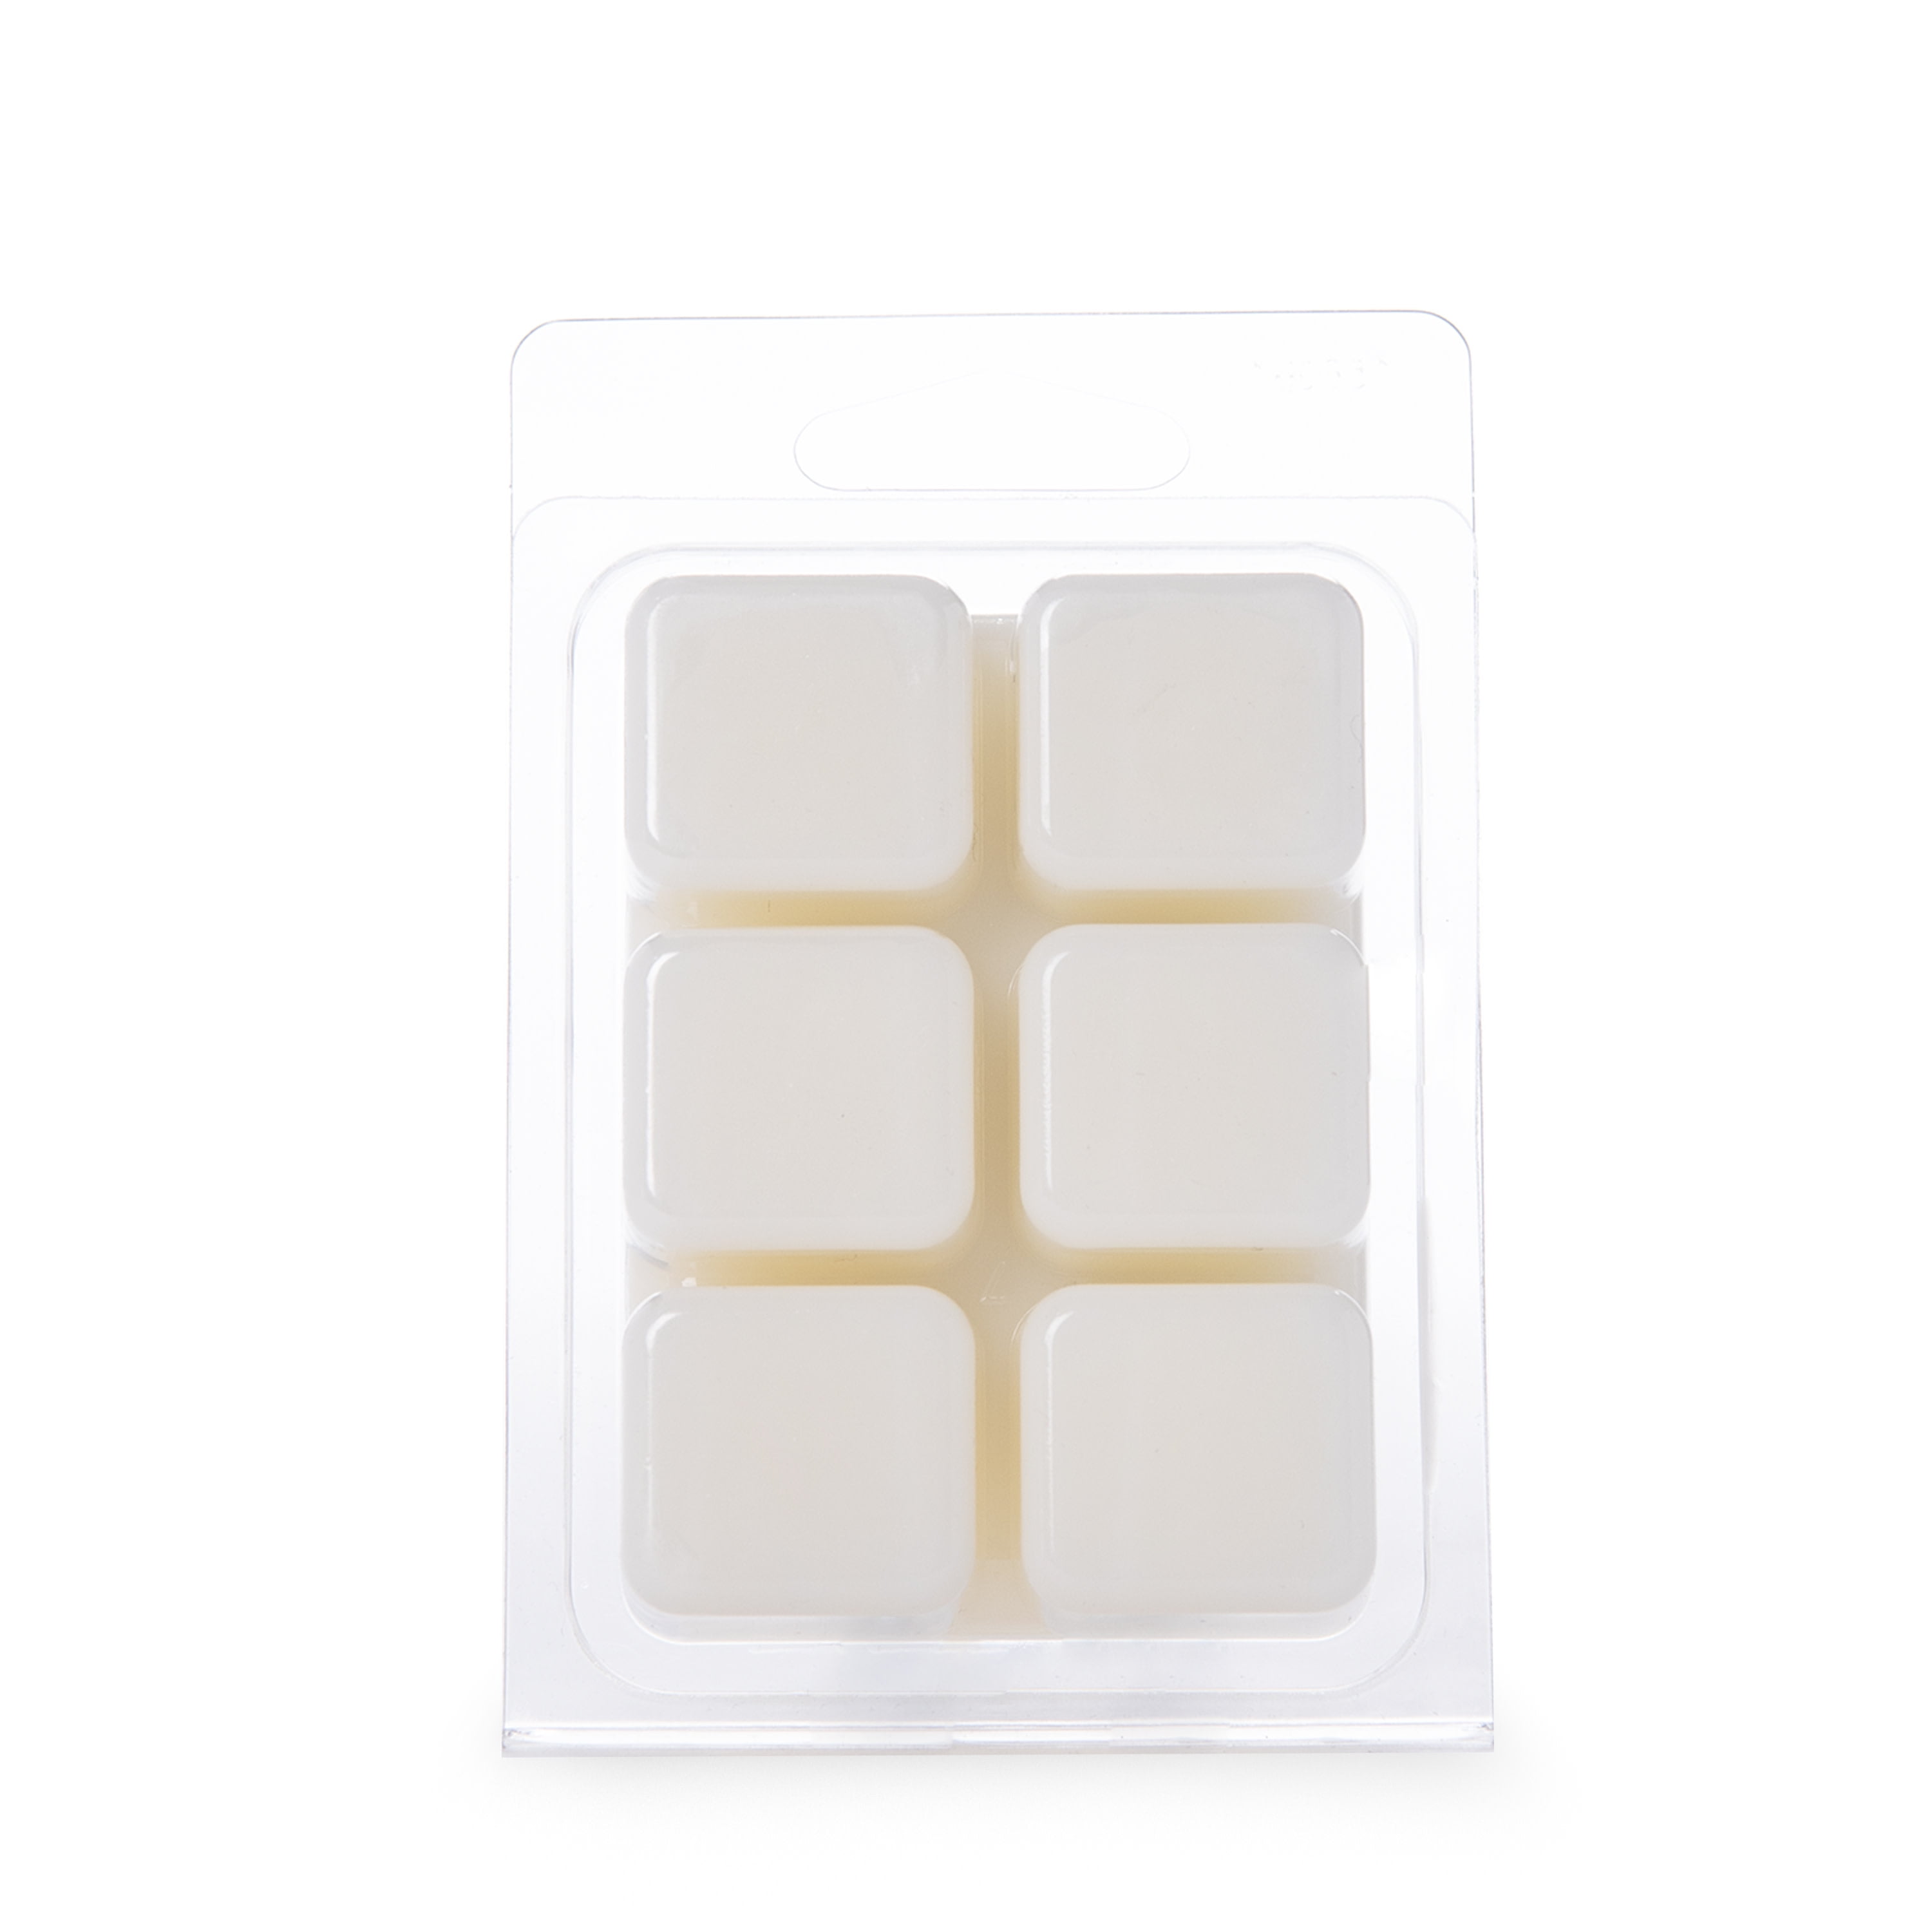 Sandalwood & Incense Scented Wax Melts, 6 Cubes, 2.5 Ounces, Mardel